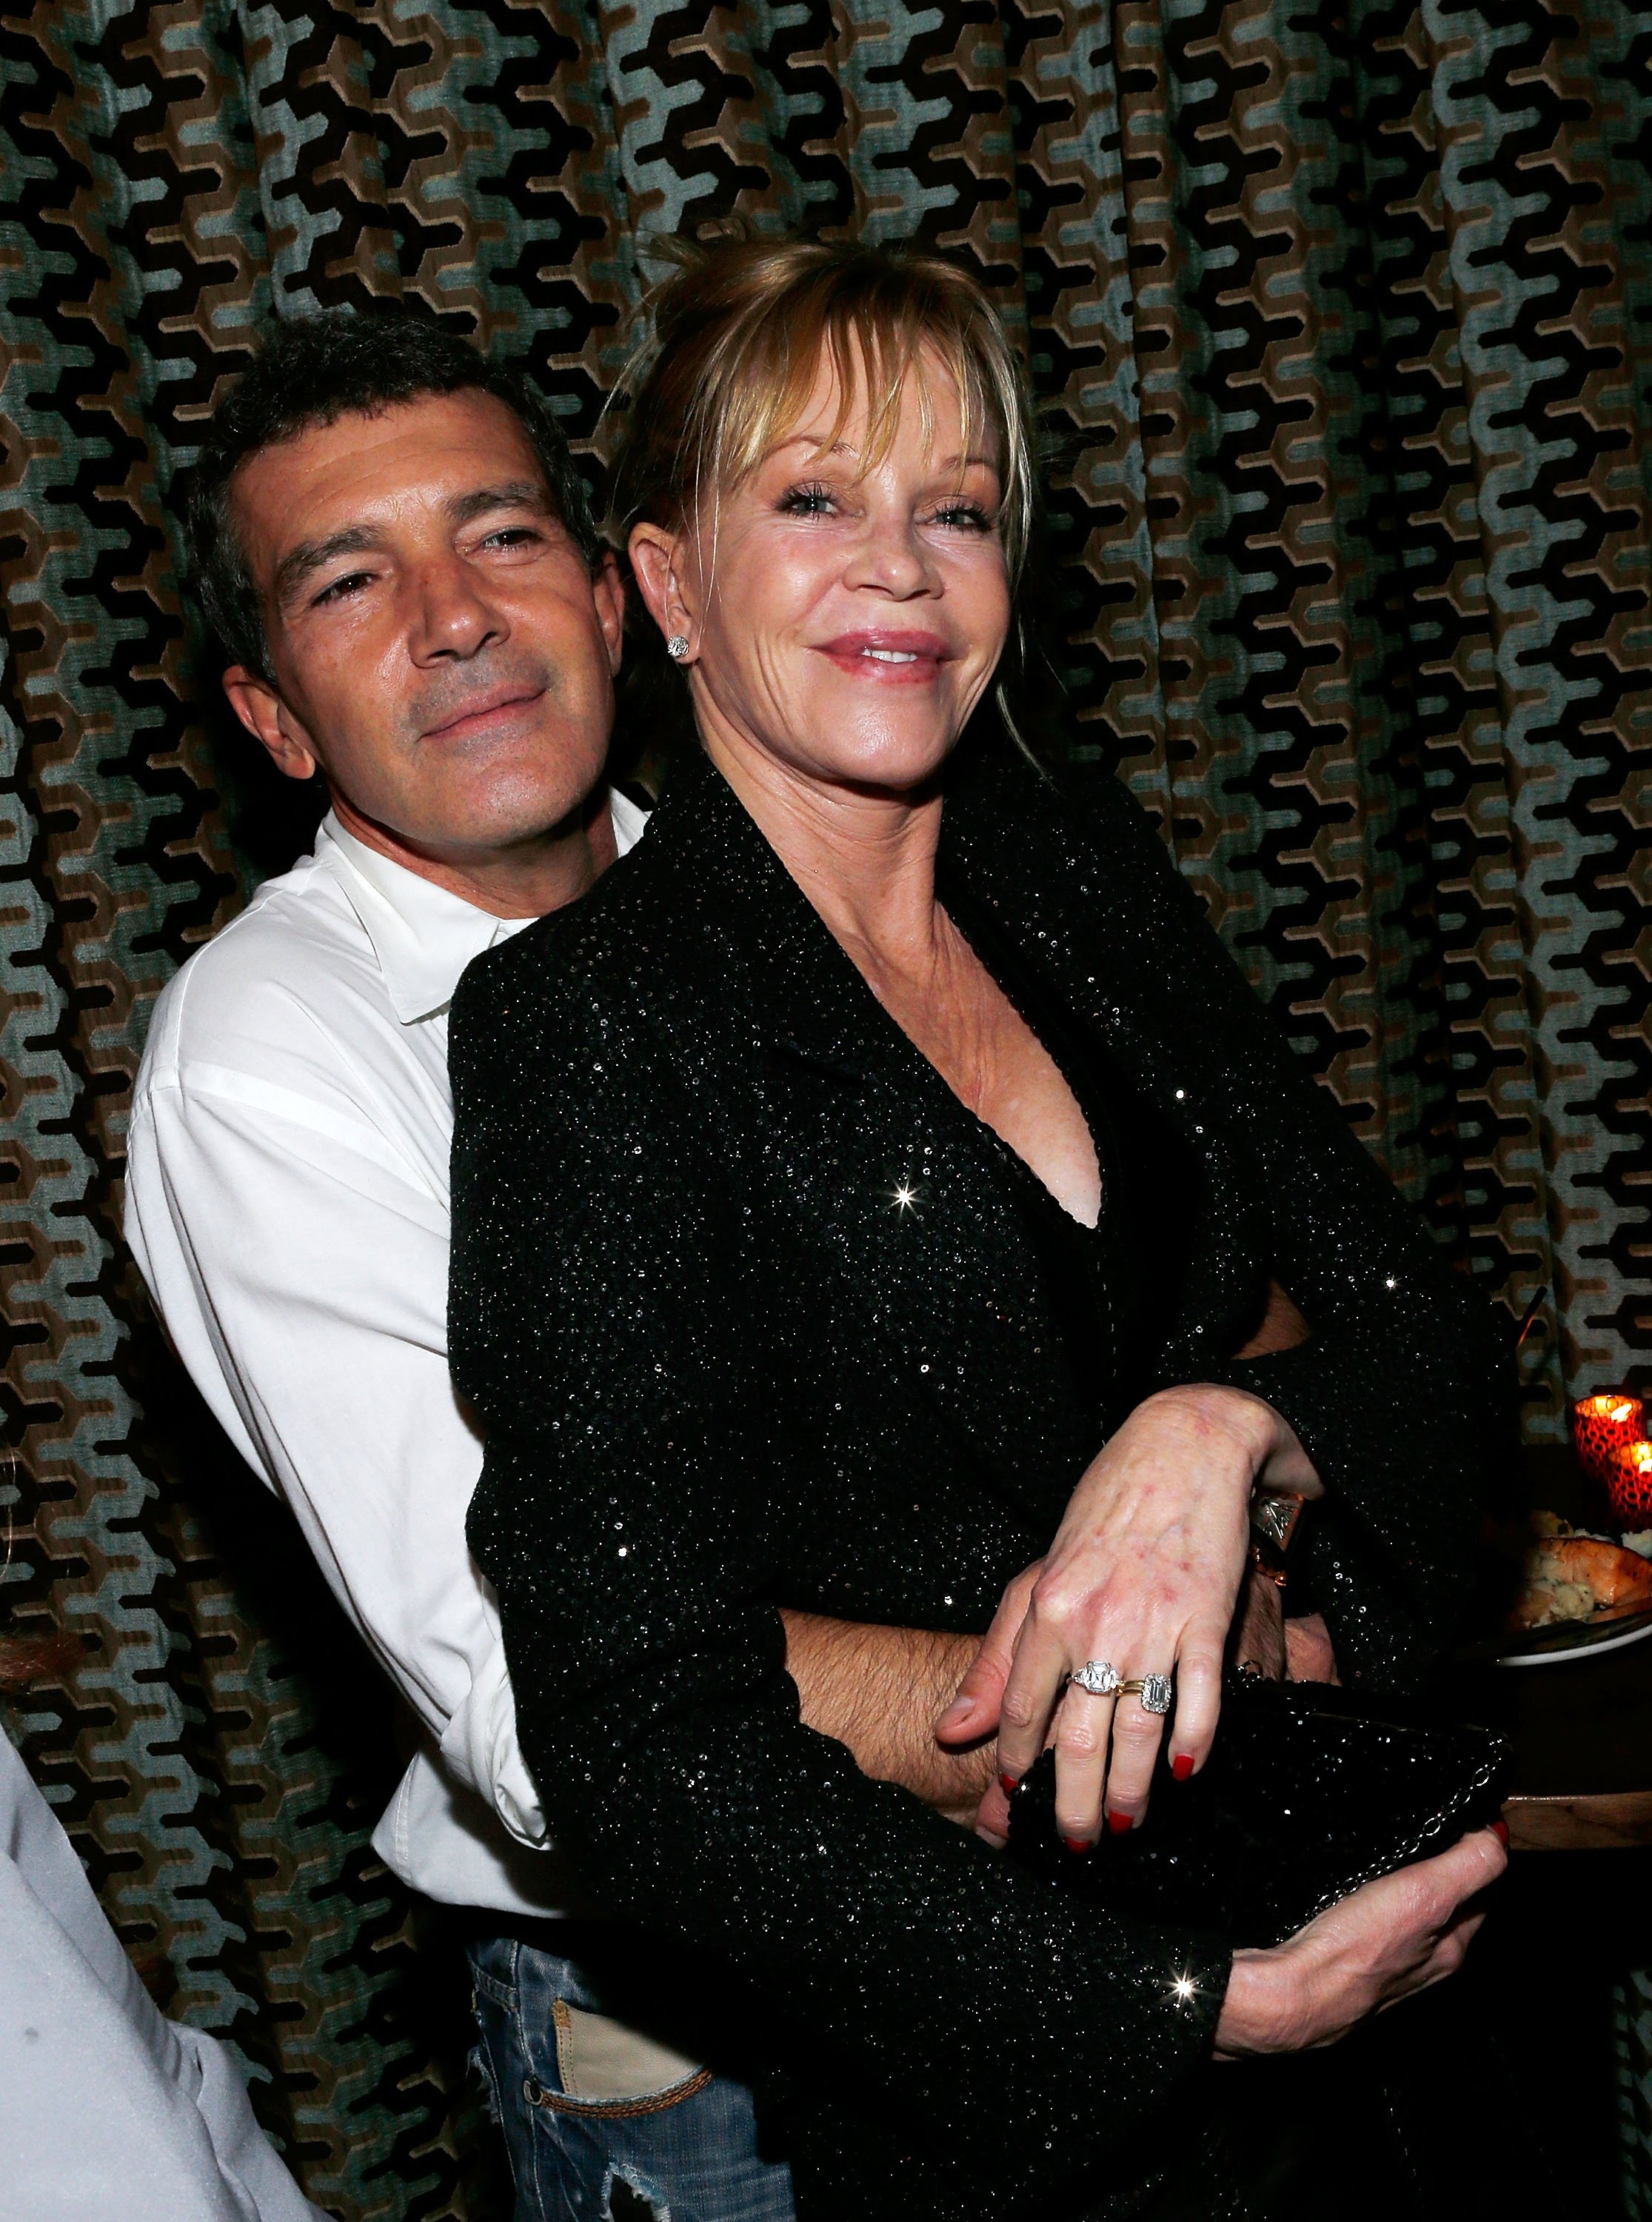 Actor Antonio Banderas and actress Melanie Griffith at the after party for the "Black Nativity" premiere at The Red Rooster on November 18, 2013 in New York City.  | Source: Getty Images